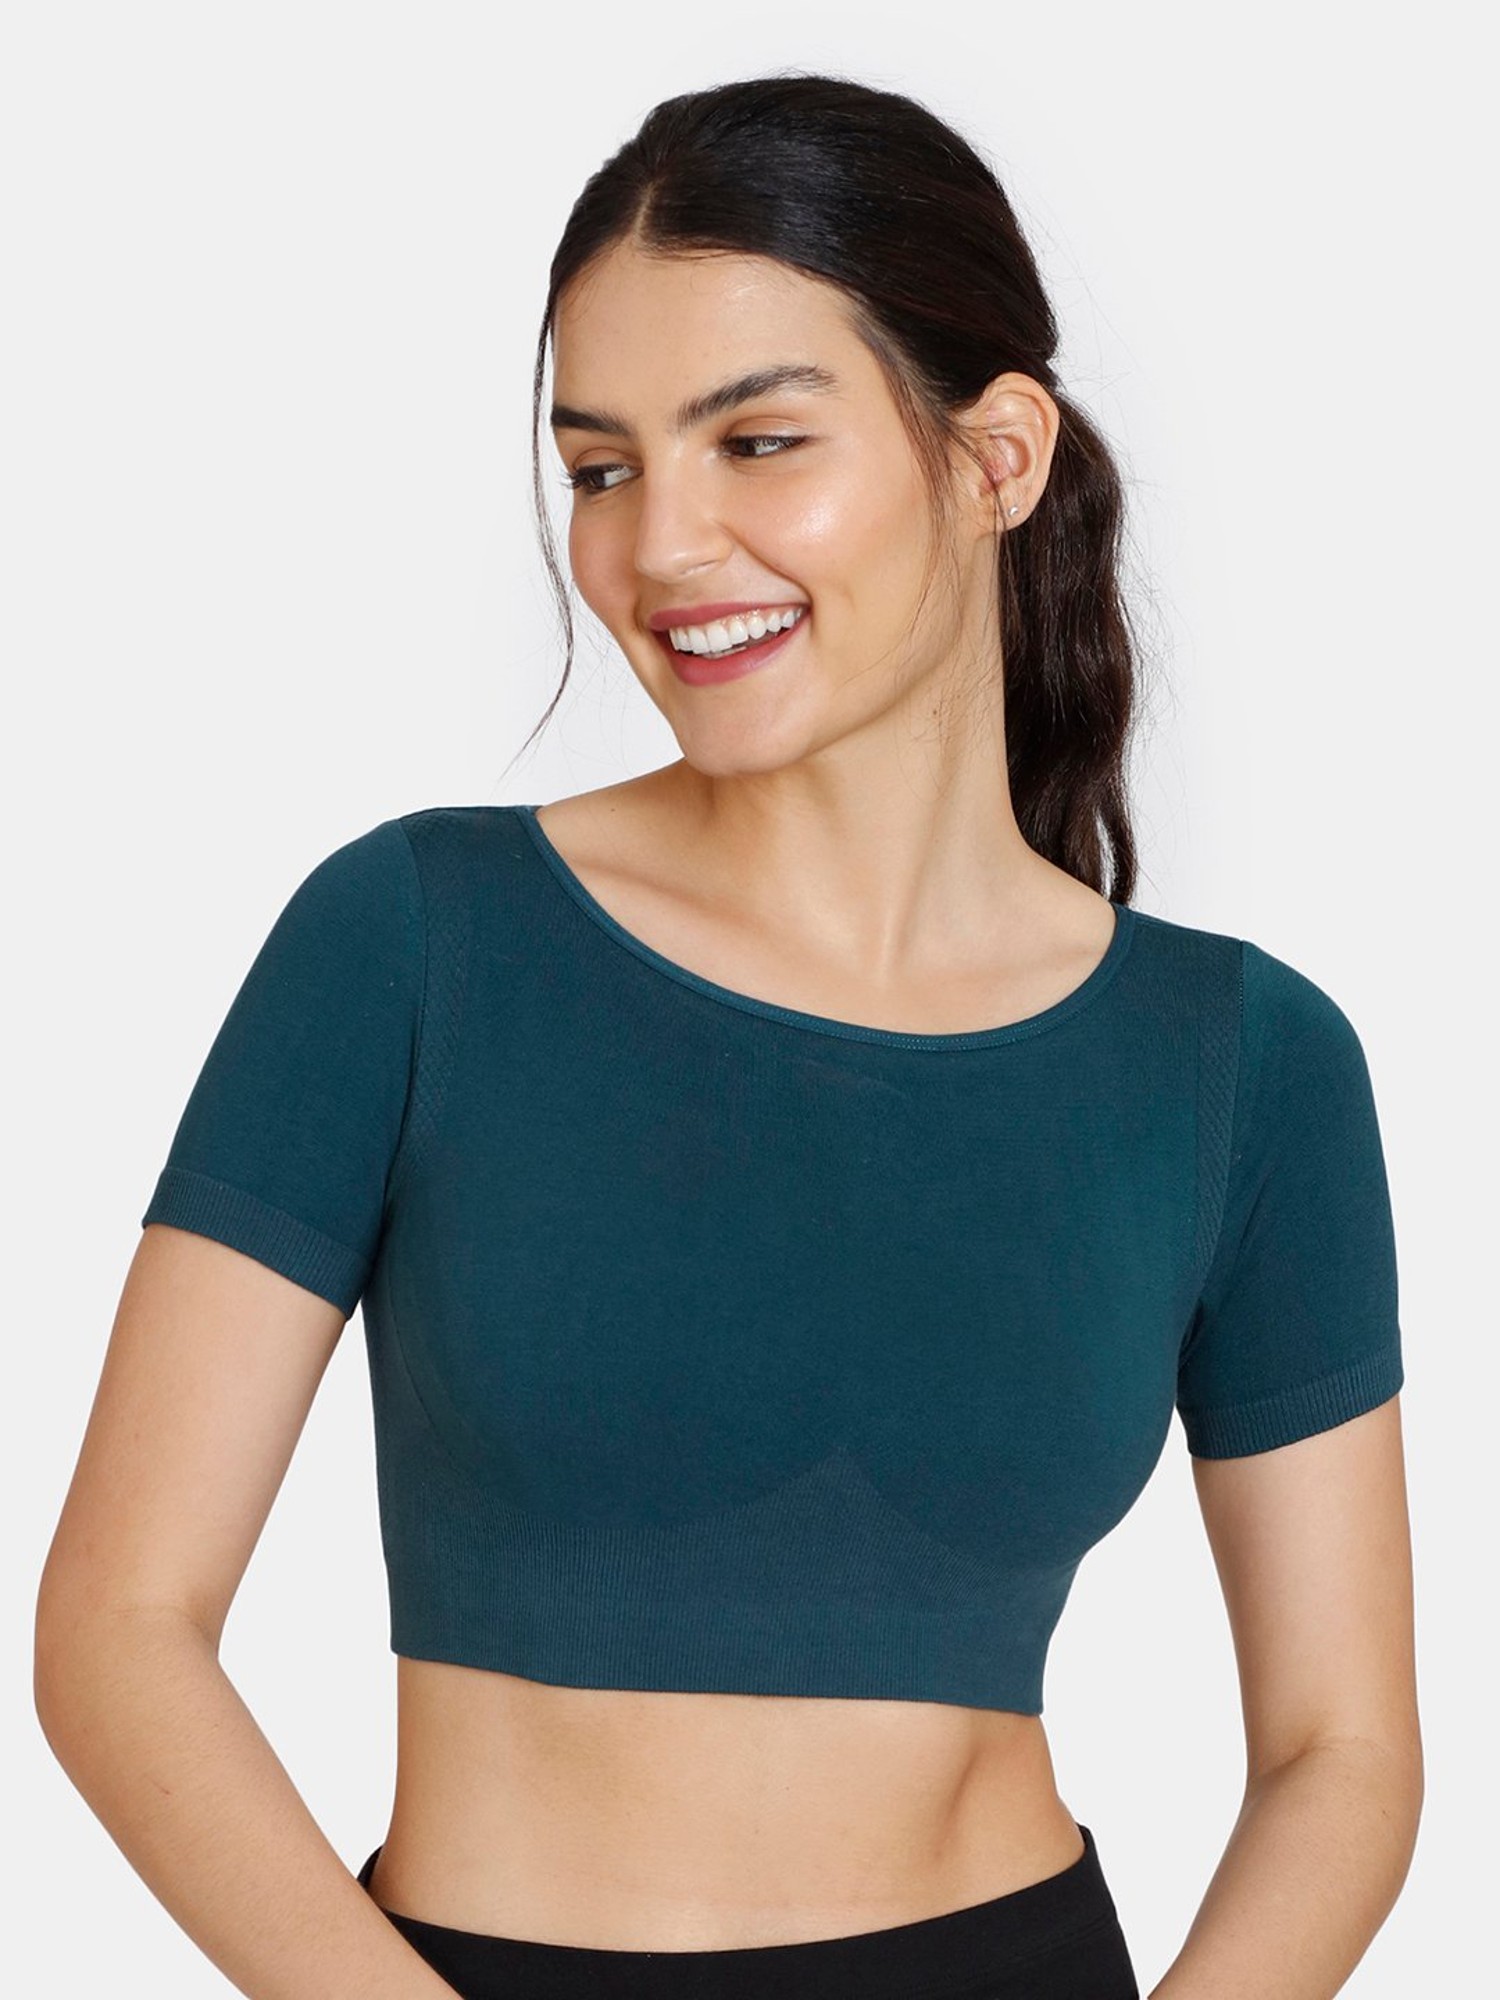 Buy Zelocity Slip On Sports Bra With Removable Padding - Deep Teal